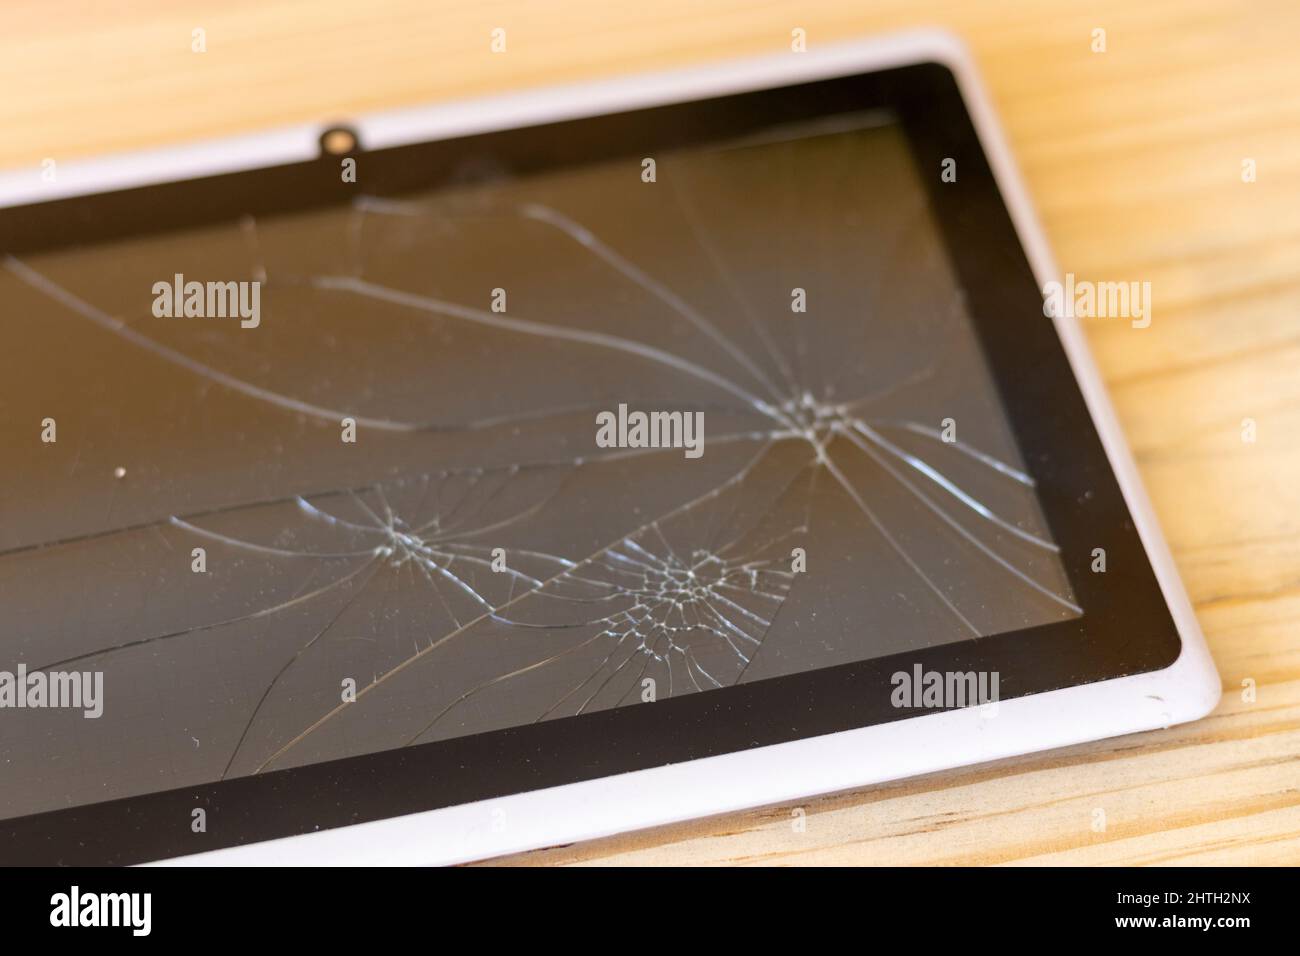 Broken screen of a tablet device Stock Photo